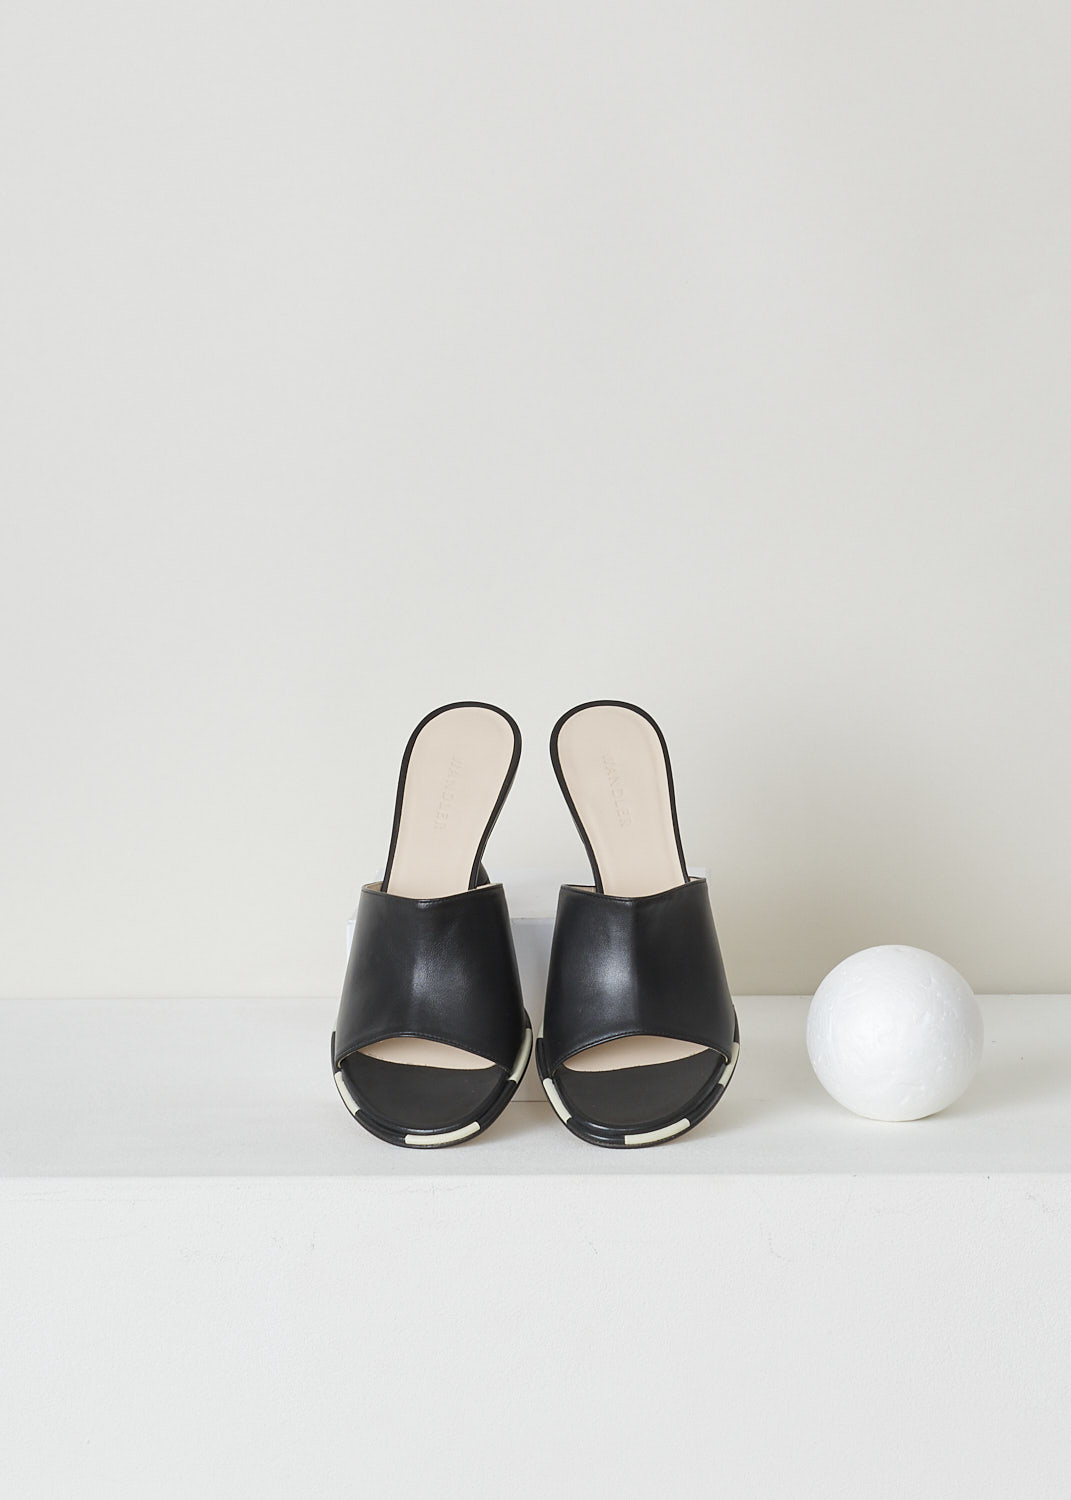 WANDLER, BLACK HEELED MULES, 22202_701204_3248_AGNES_MULE_BLACK_MIX, Black, Top, These black heeled mules have a rounded open-toe with contrasting white stripes decorating the trim. The slip-on mules have a mid-height trapezoid shaped heel.
